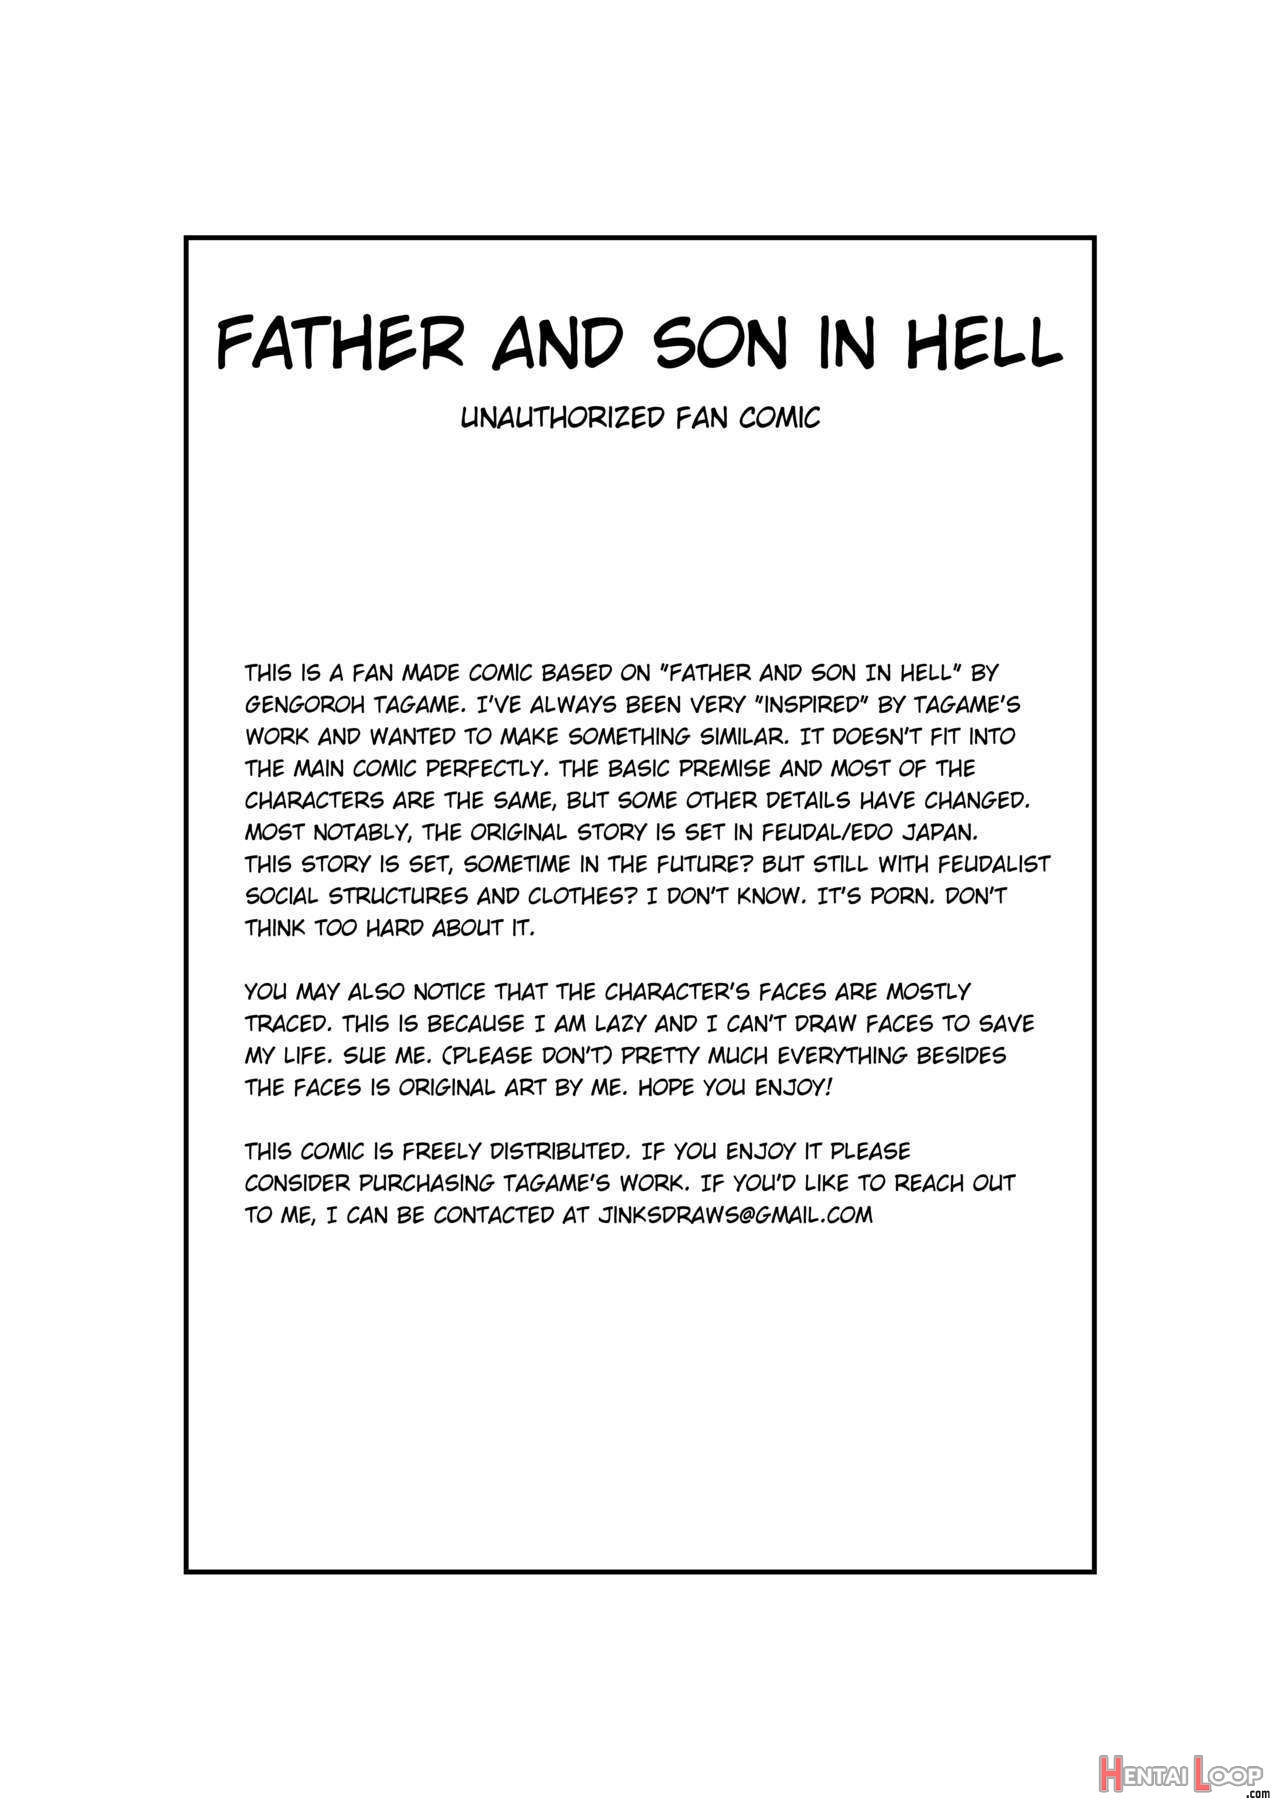 Father And Son In Hell - Unauthorized Fan Comic page 1